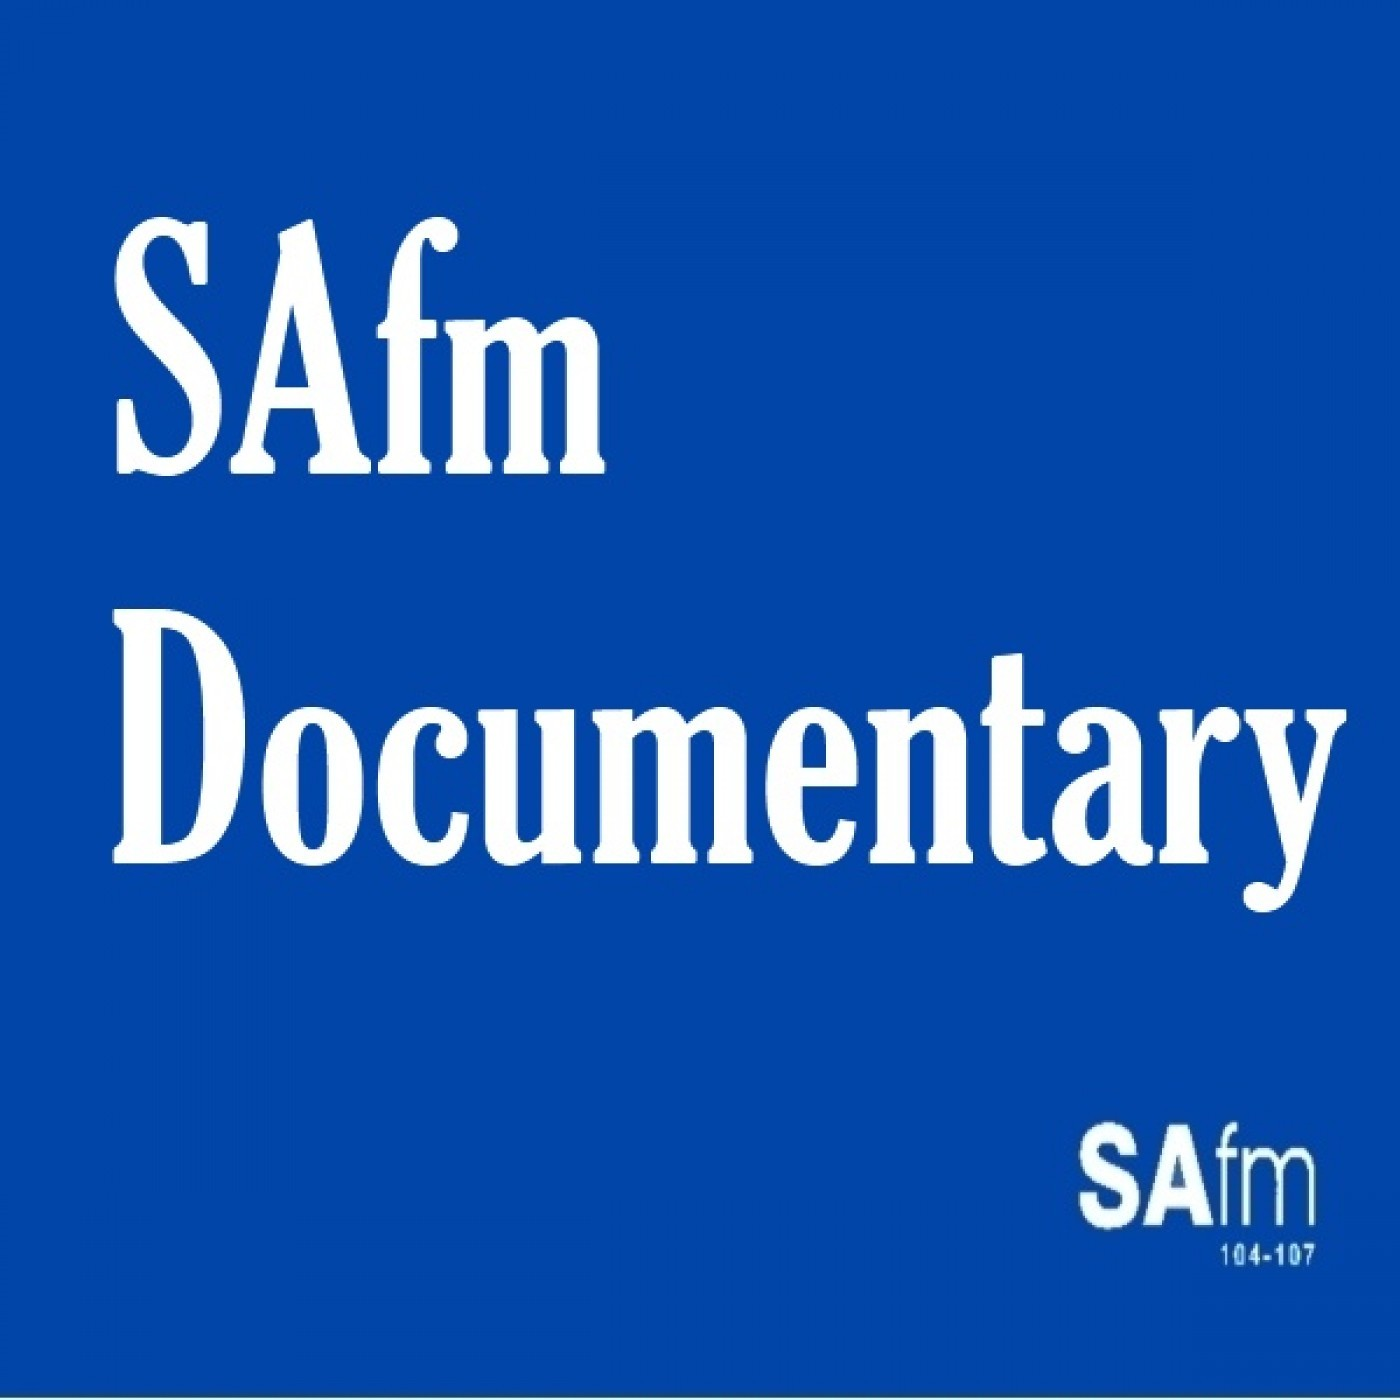 SAfm Documentary - 31 March 2019 - THREE EXTRAORDINARY SOUTH AFRICANS No 2 - Sindiwe Magona